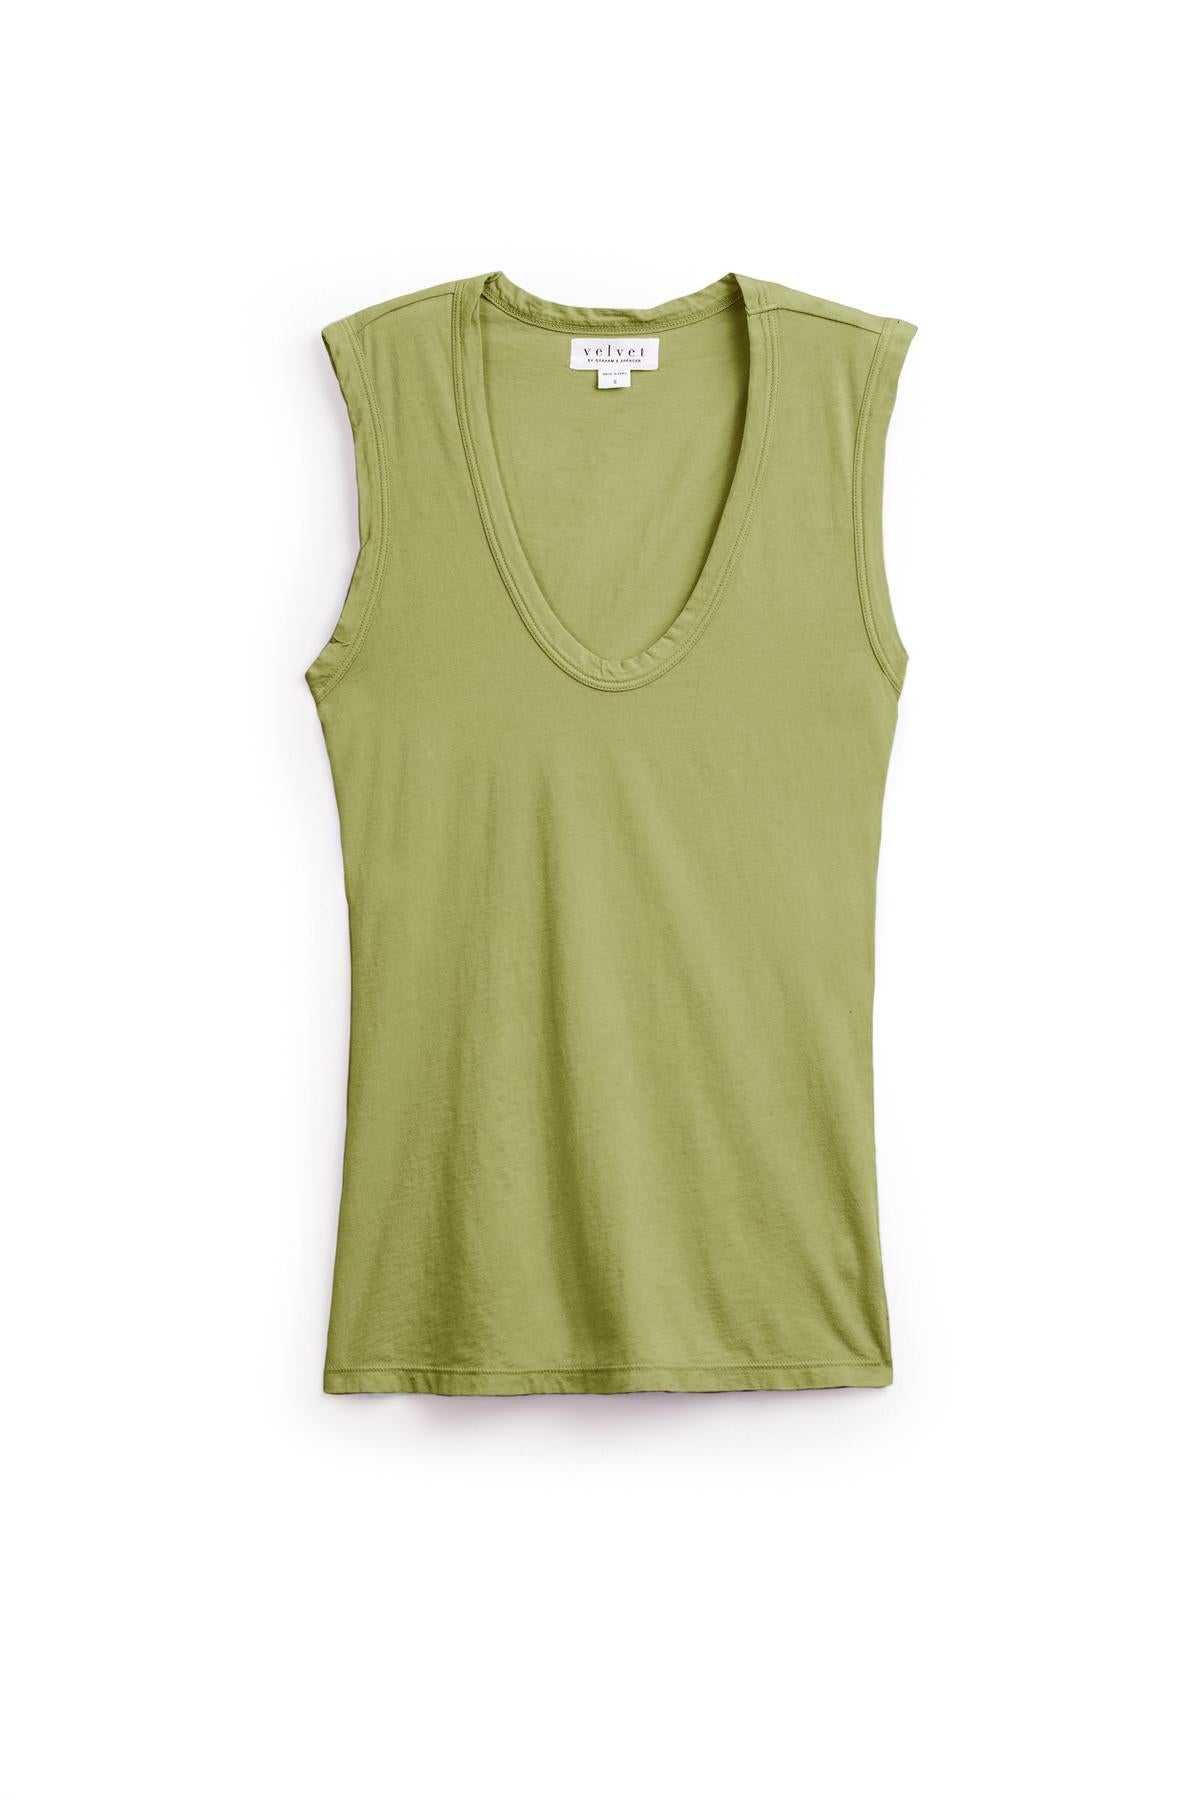 A Velvet by Graham & Spencer ESTINA TANK TOP, featuring a low-scoop-neck design and a soft gauzy whisper texture, against a white background.-37104298033345